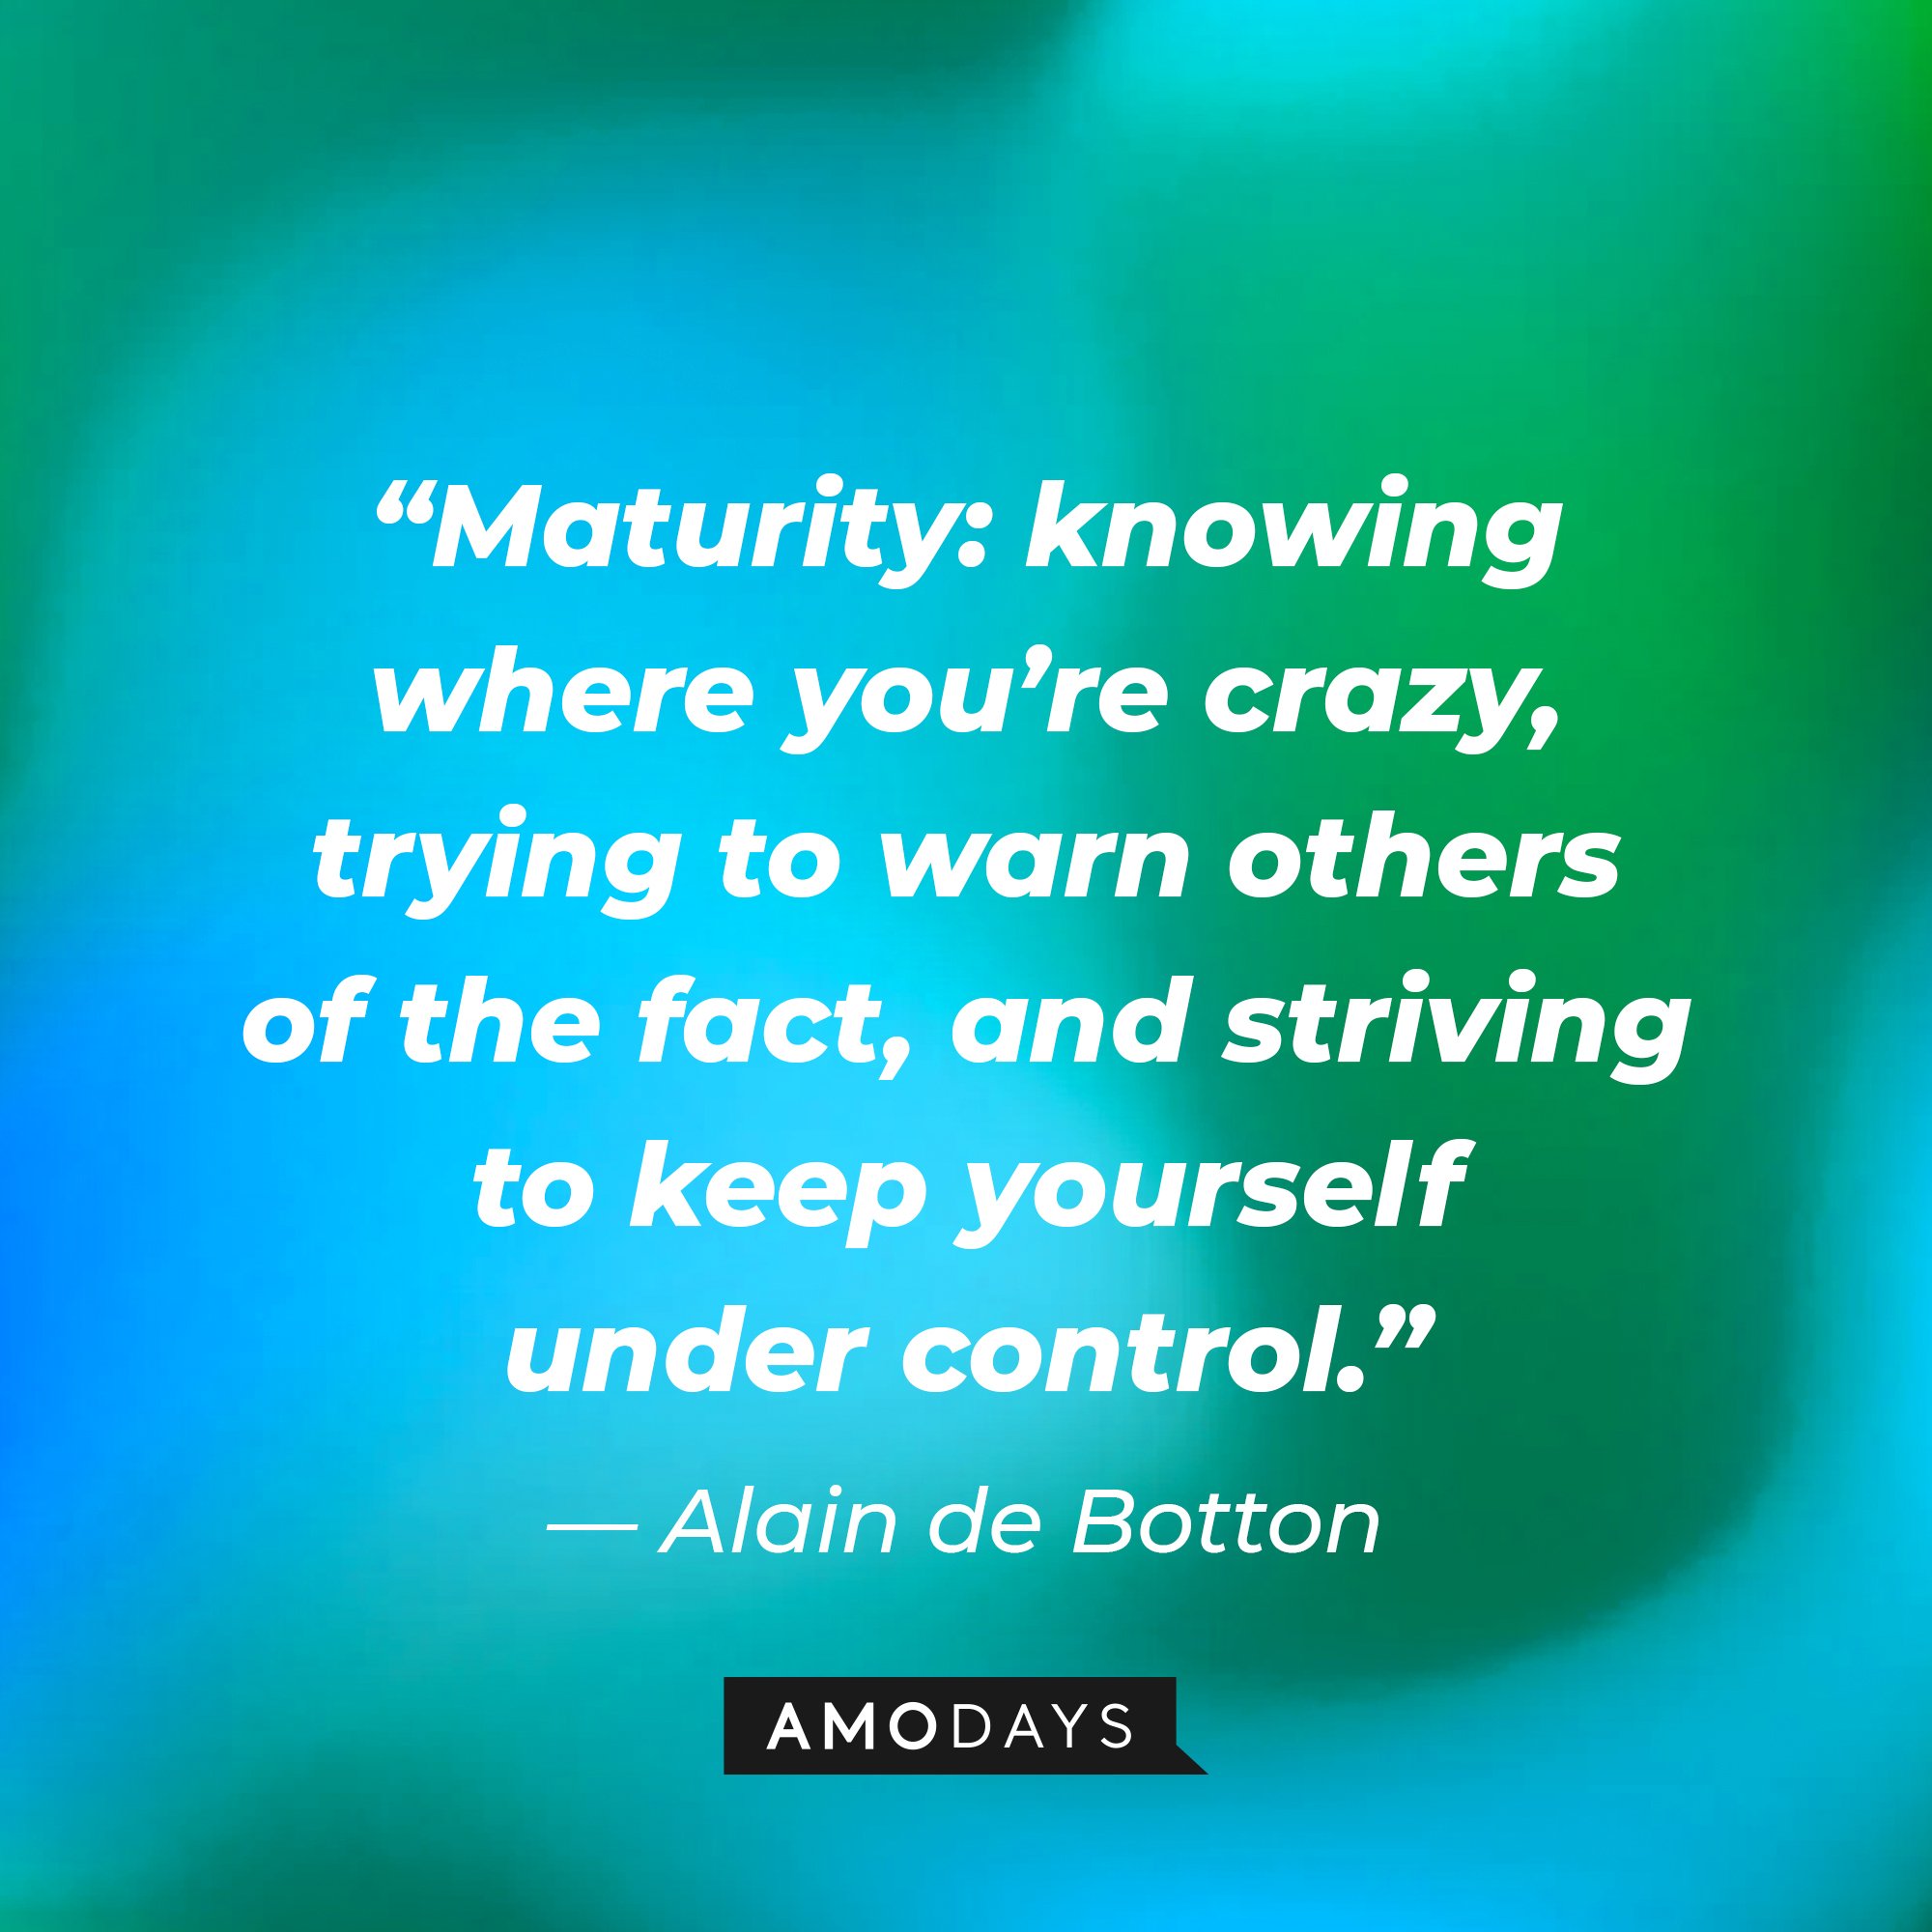  Alain de Botton's quote: “Maturity: knowing where you’re crazy, trying to warn others of the fact, and striving to keep yourself under control.” | Image: AmoDays